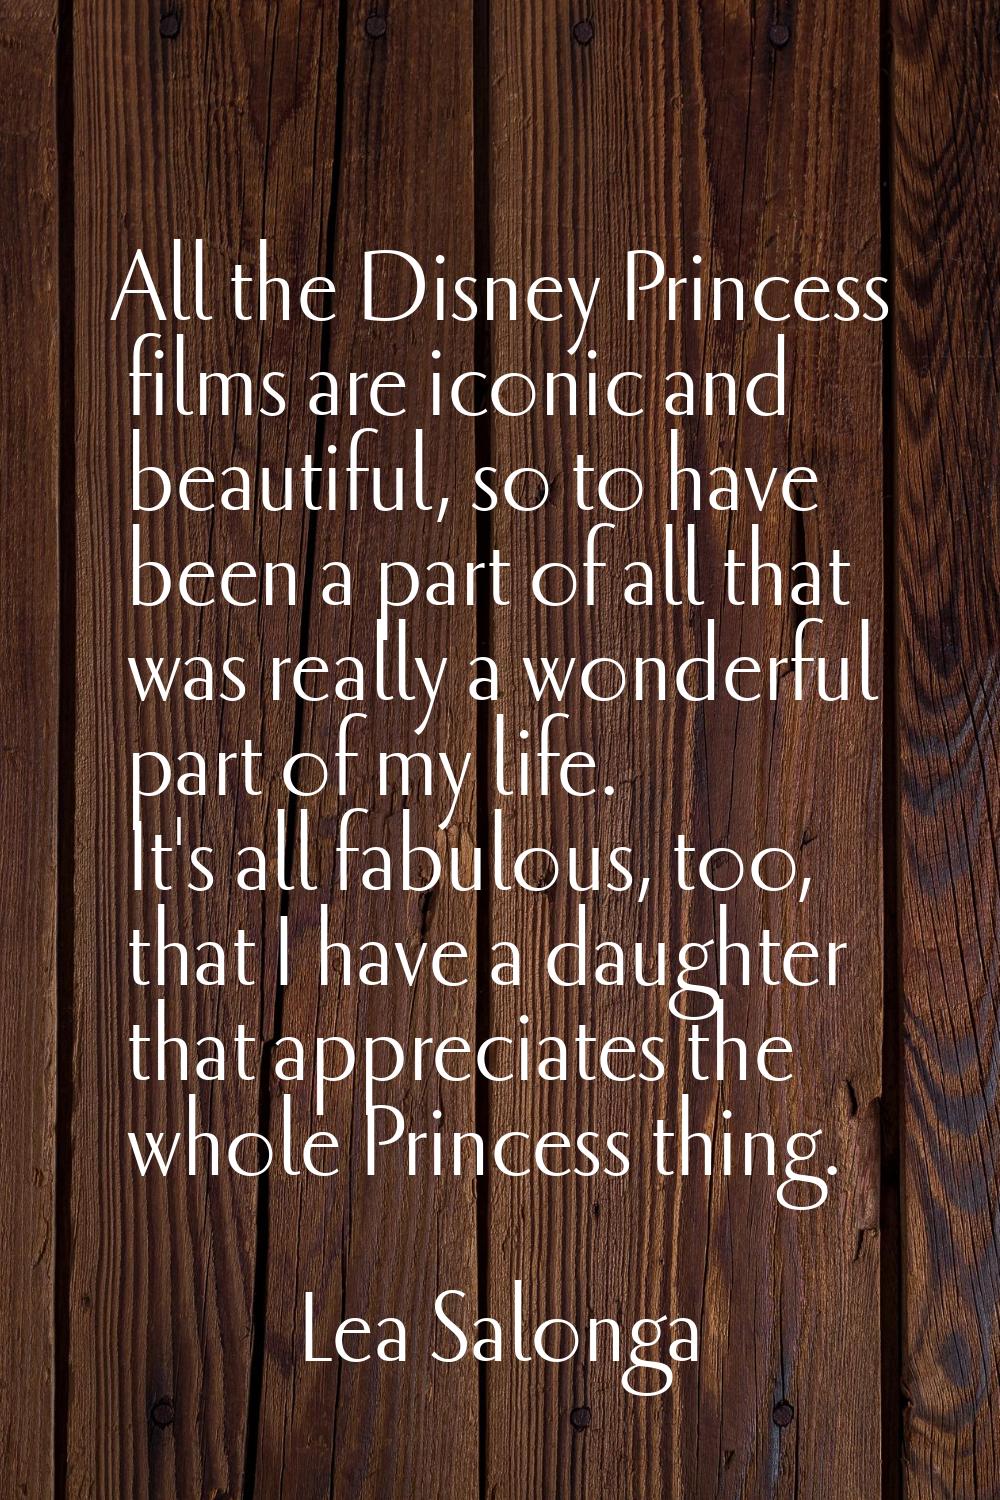 All the Disney Princess films are iconic and beautiful, so to have been a part of all that was real